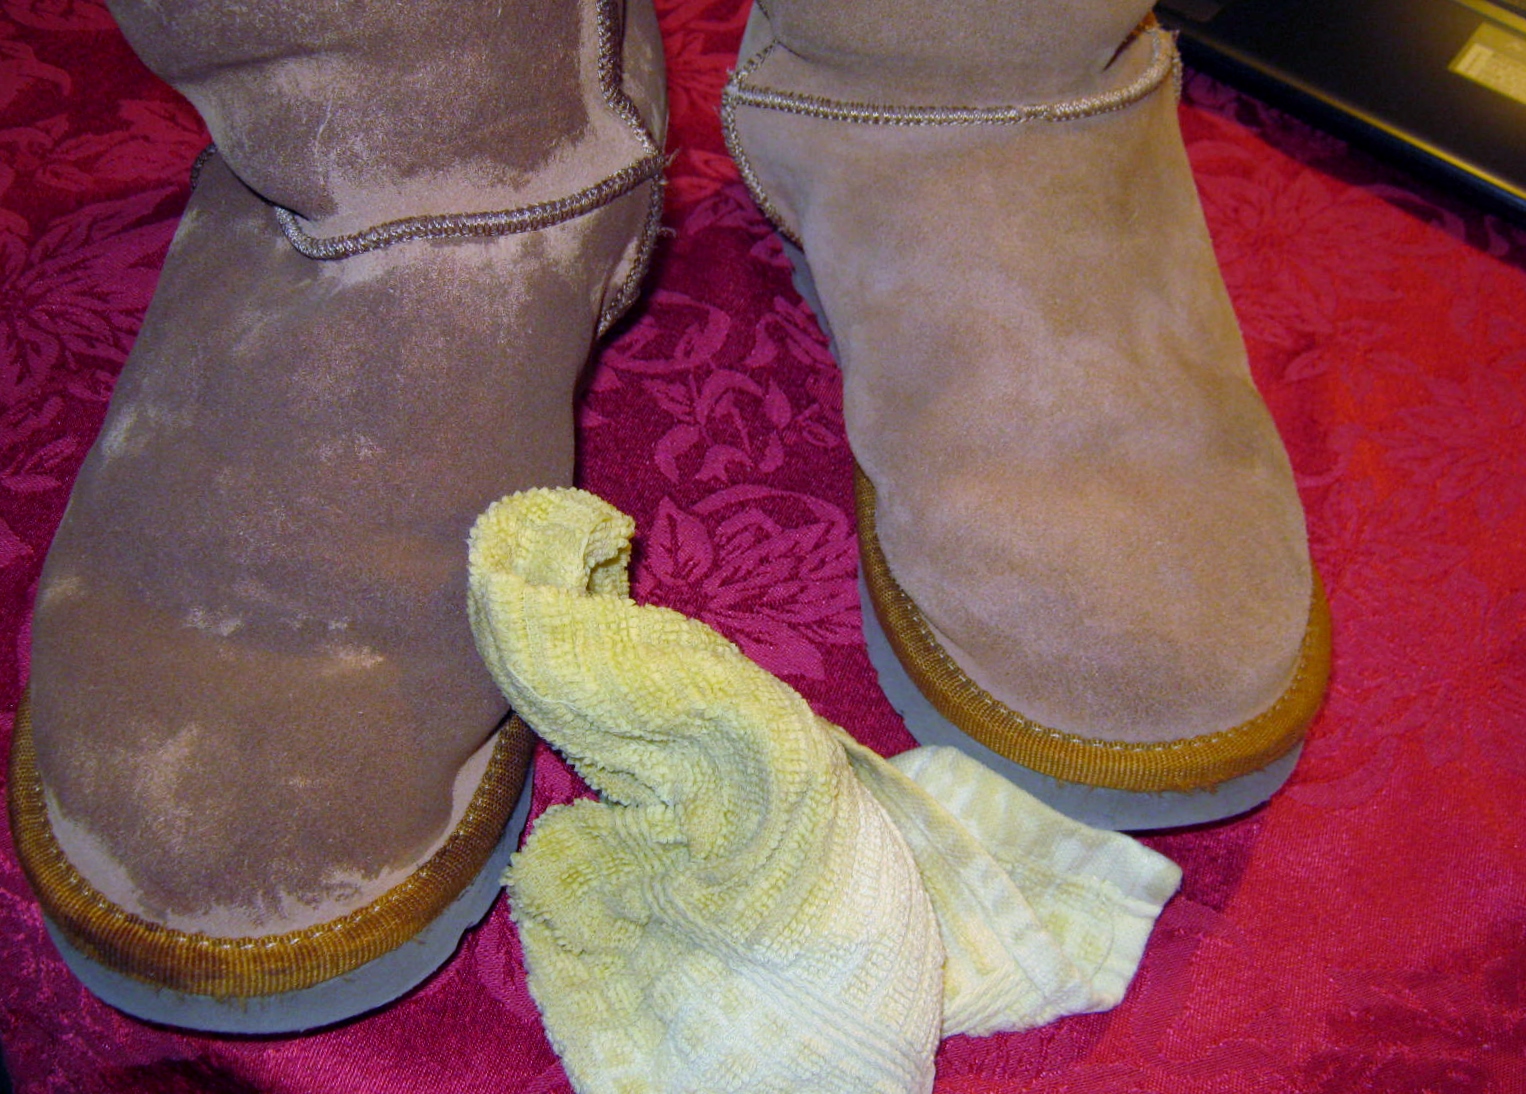 clean uggs from salt 